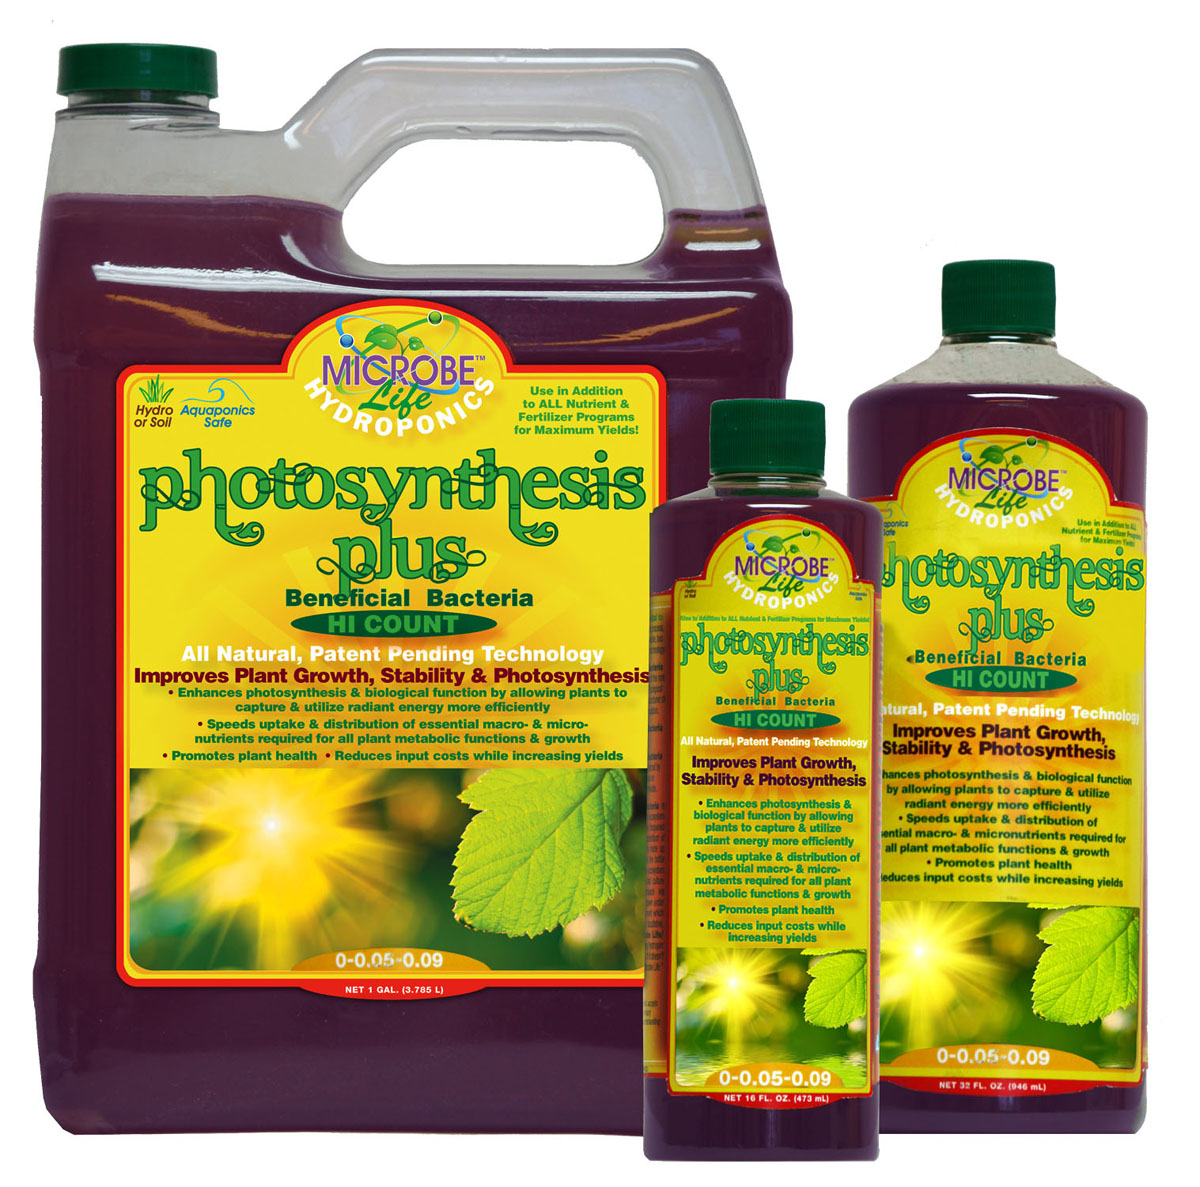 Picture for Microbe Life Photosynthesis Plus, 2.5 gal